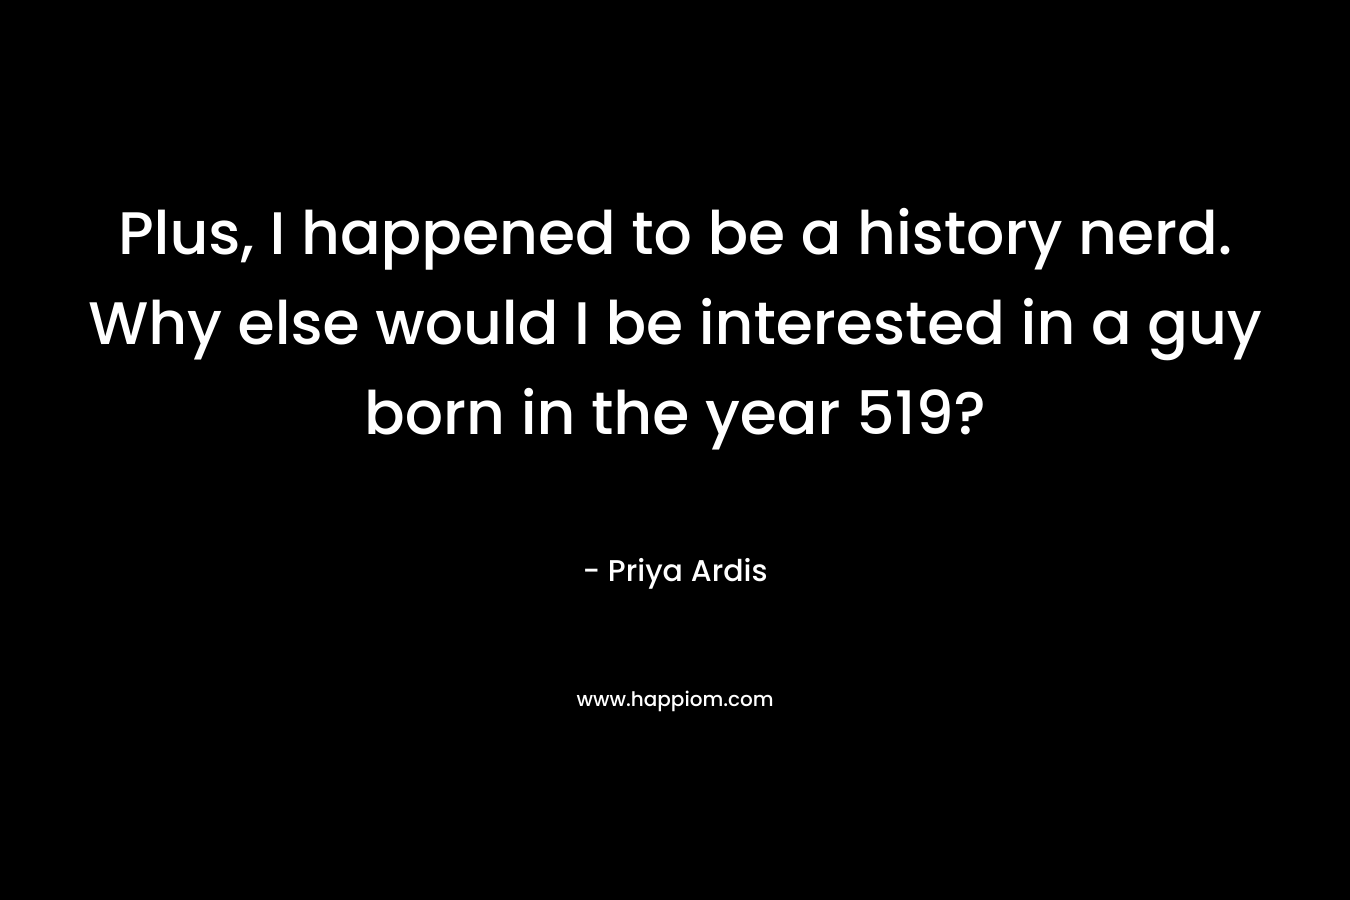 Plus, I happened to be a history nerd. Why else would I be interested in a guy born in the year 519? – Priya Ardis